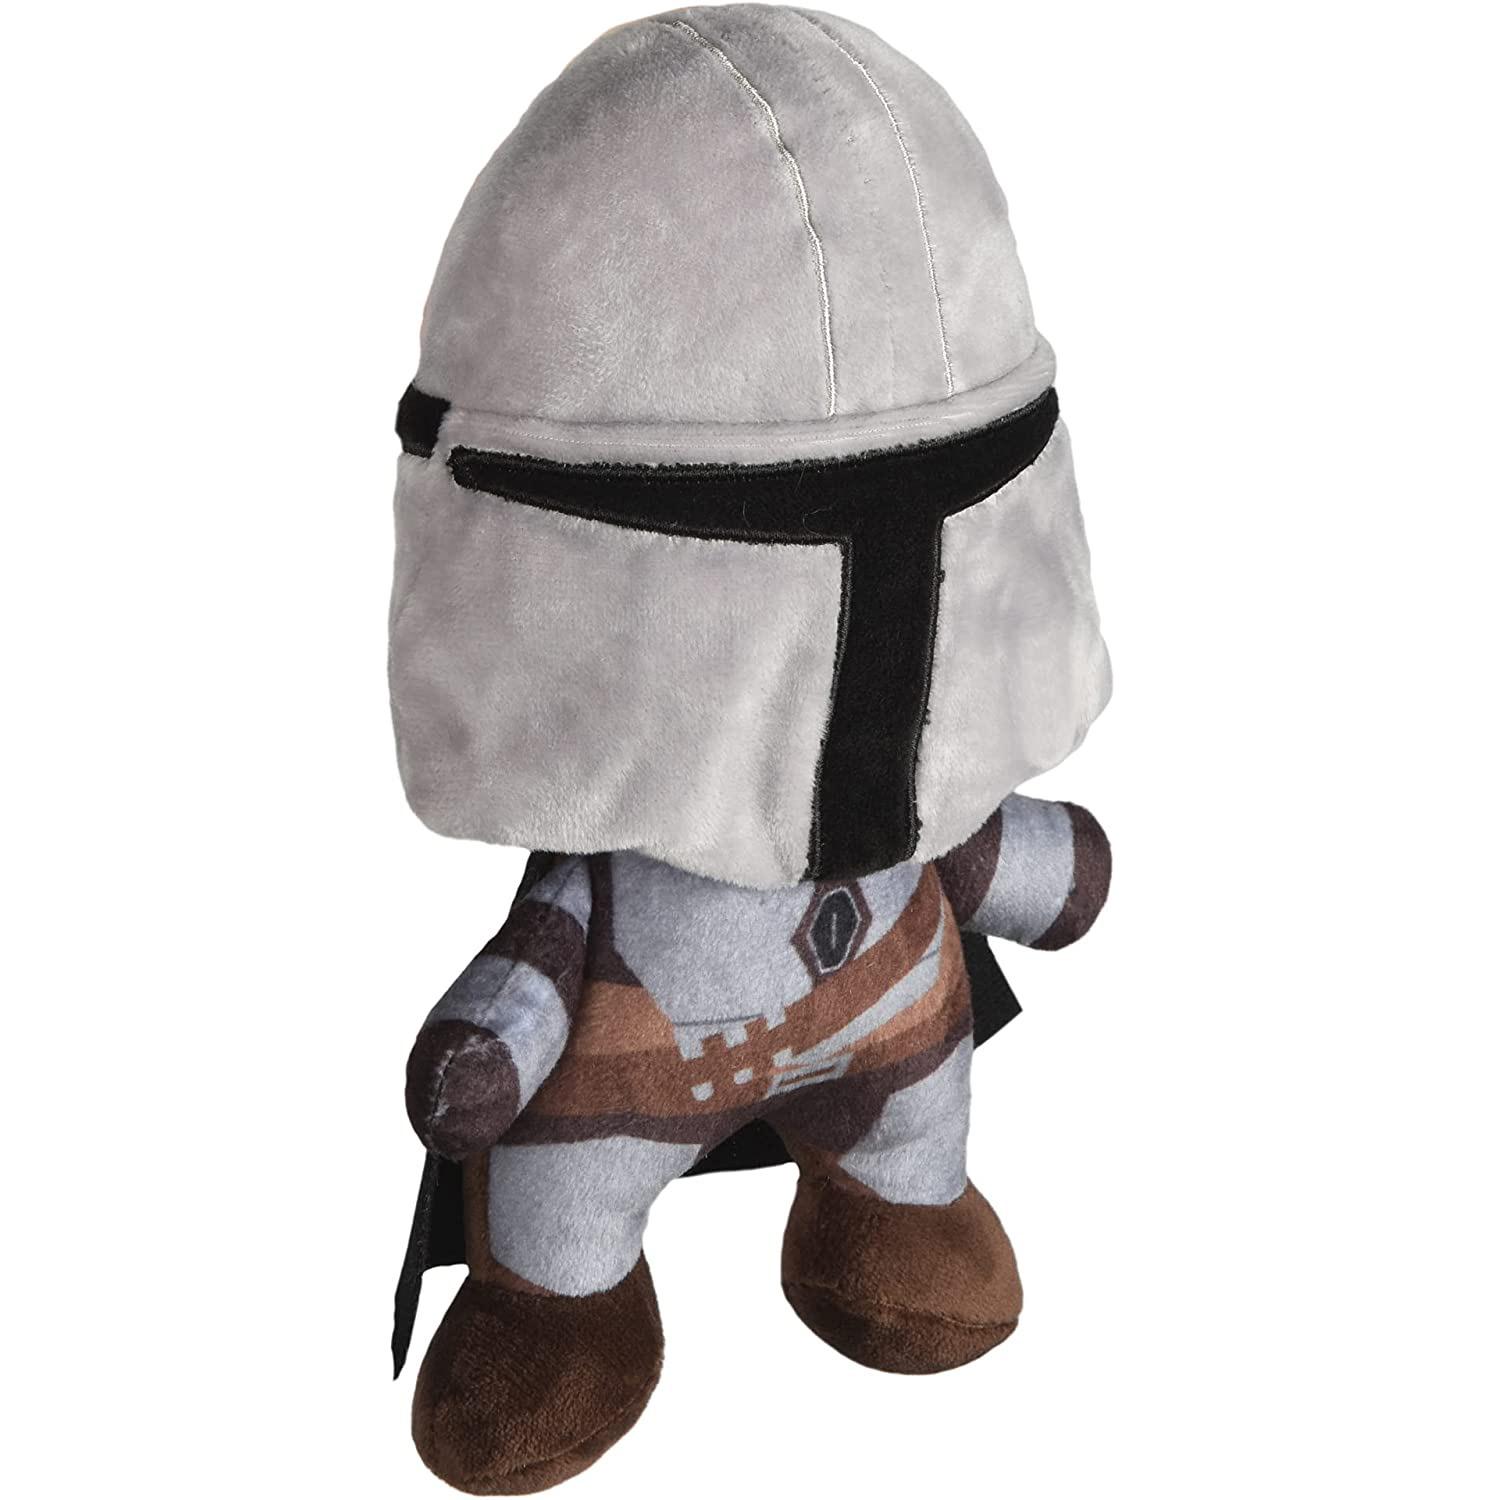 Star Wars The Mandalorian Squeaky Plush Dog Toy for $3.02